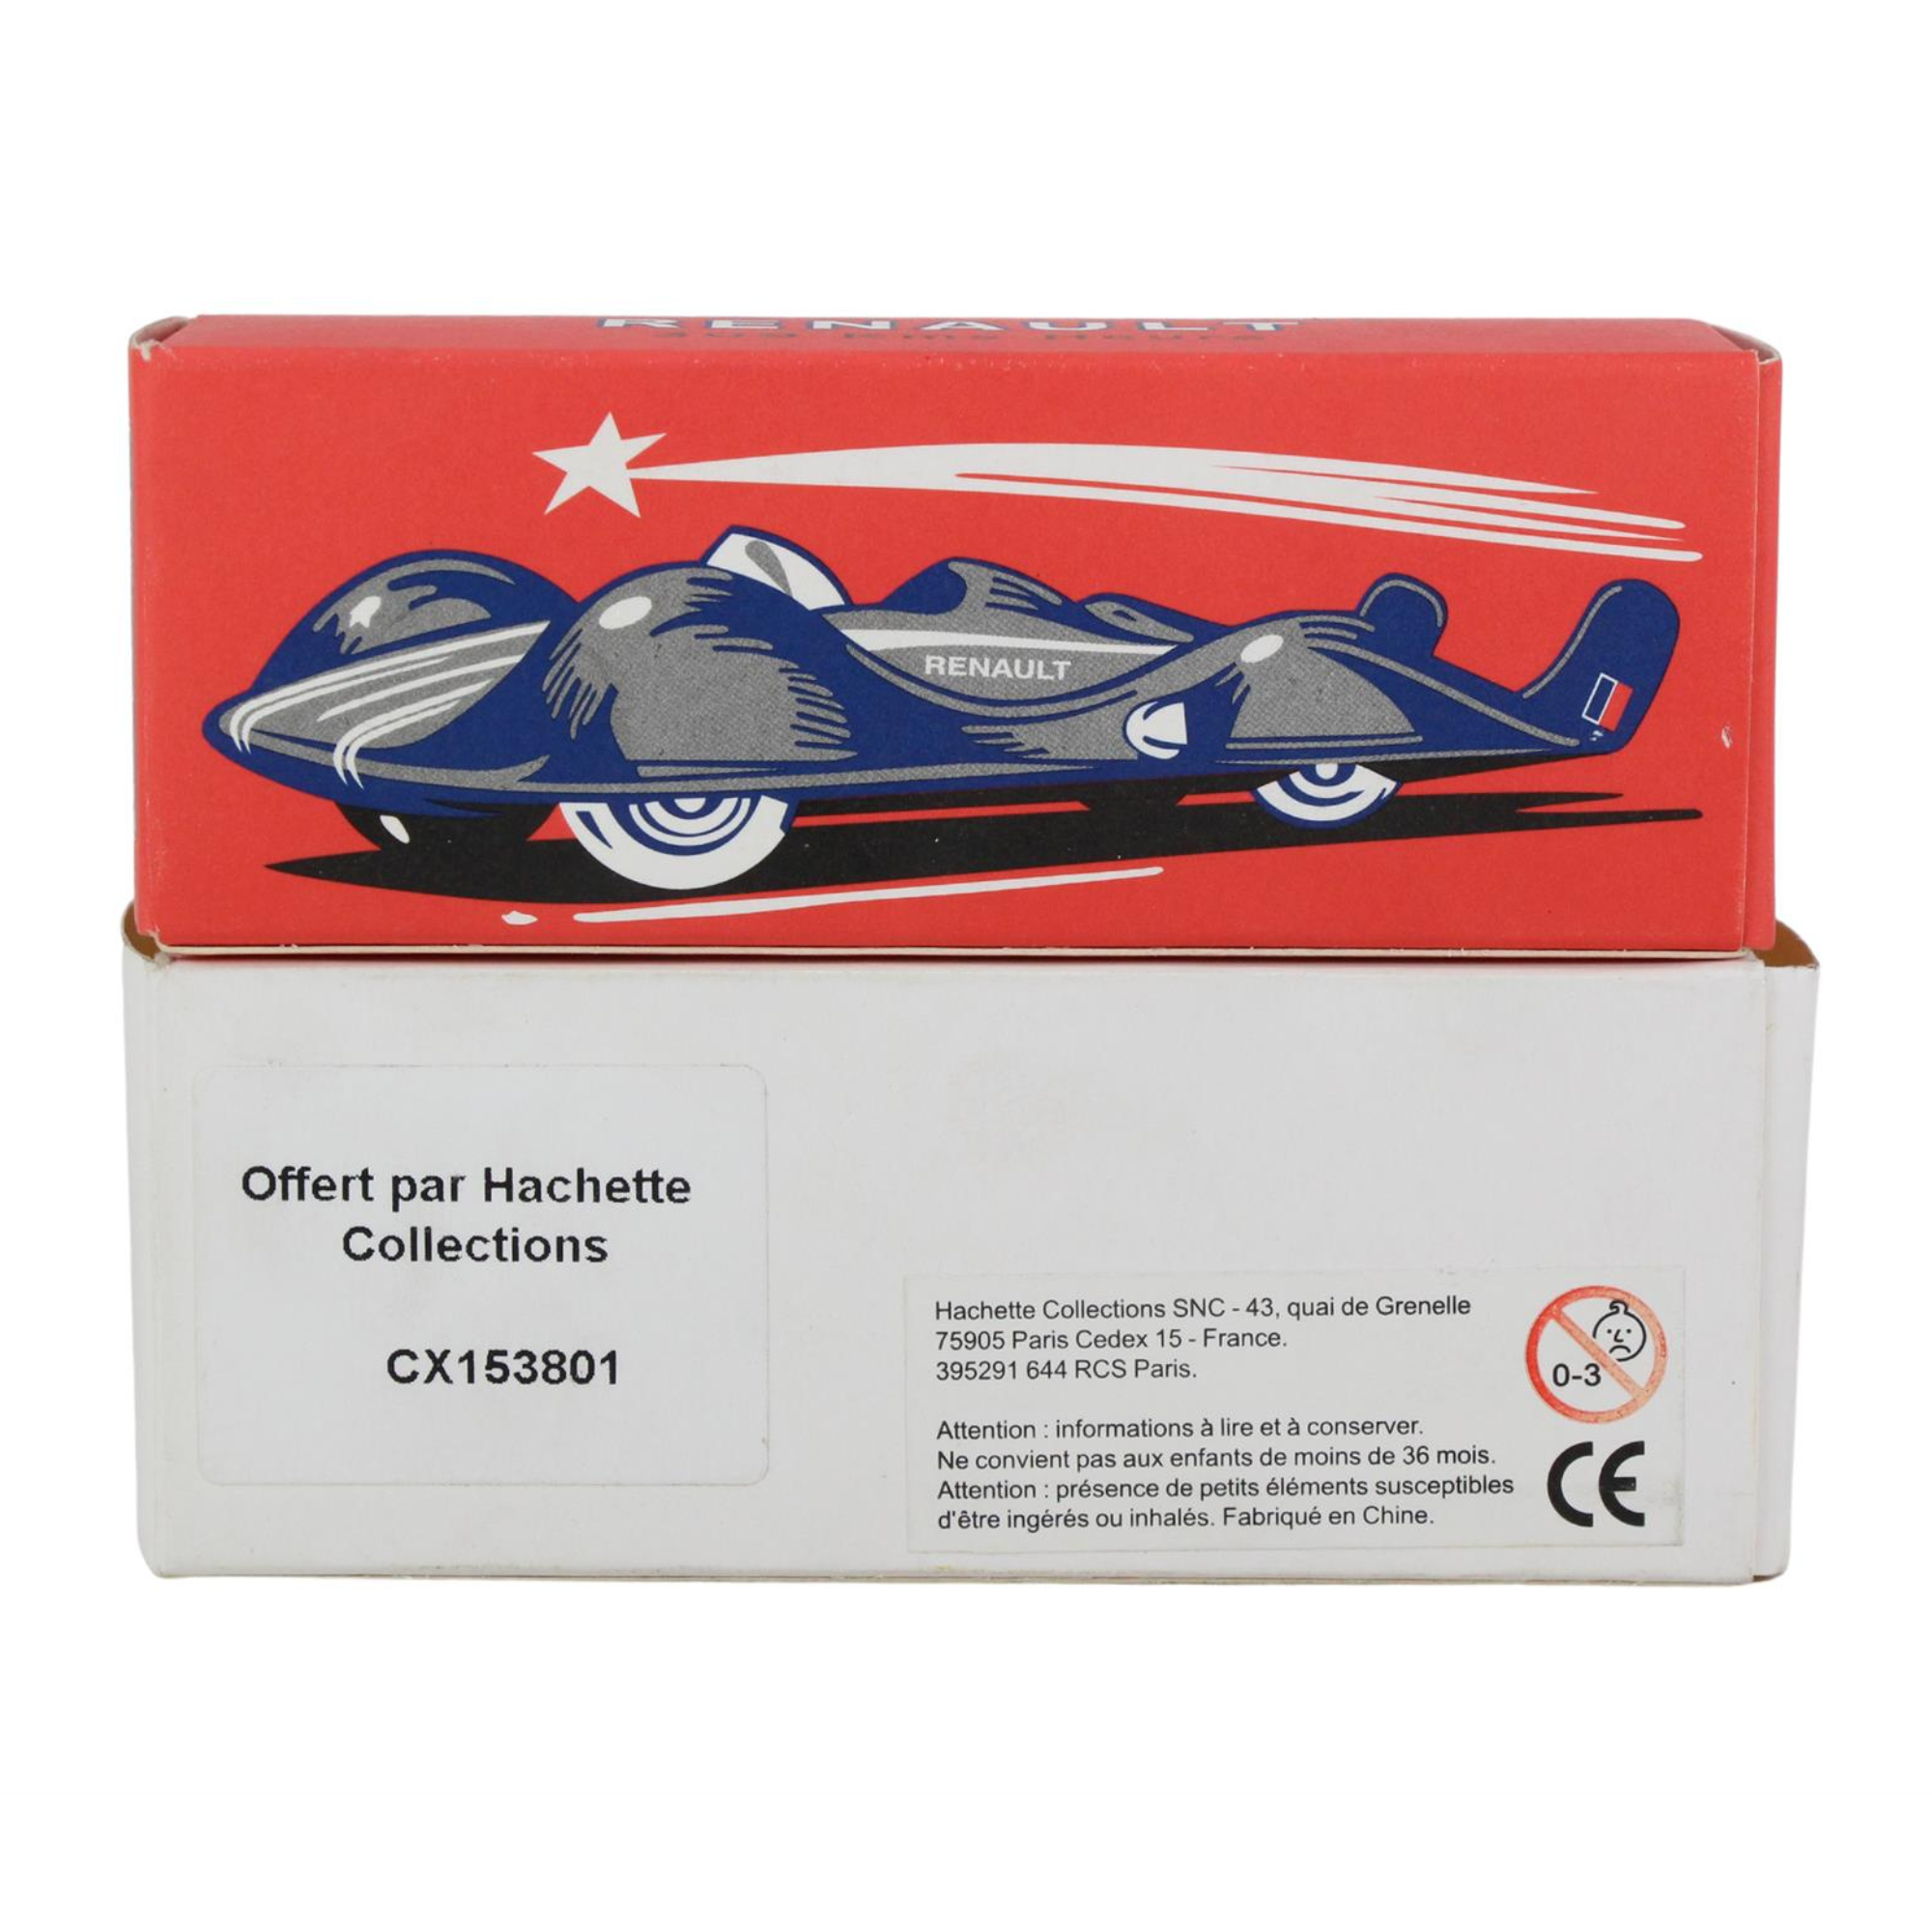 Eligor Models - 1:43 Scale Diecast "Voiture A Turbine 309 Kms Heure - Letoile Filante - New Unopened Still with Original Packaging - Toptoys2u